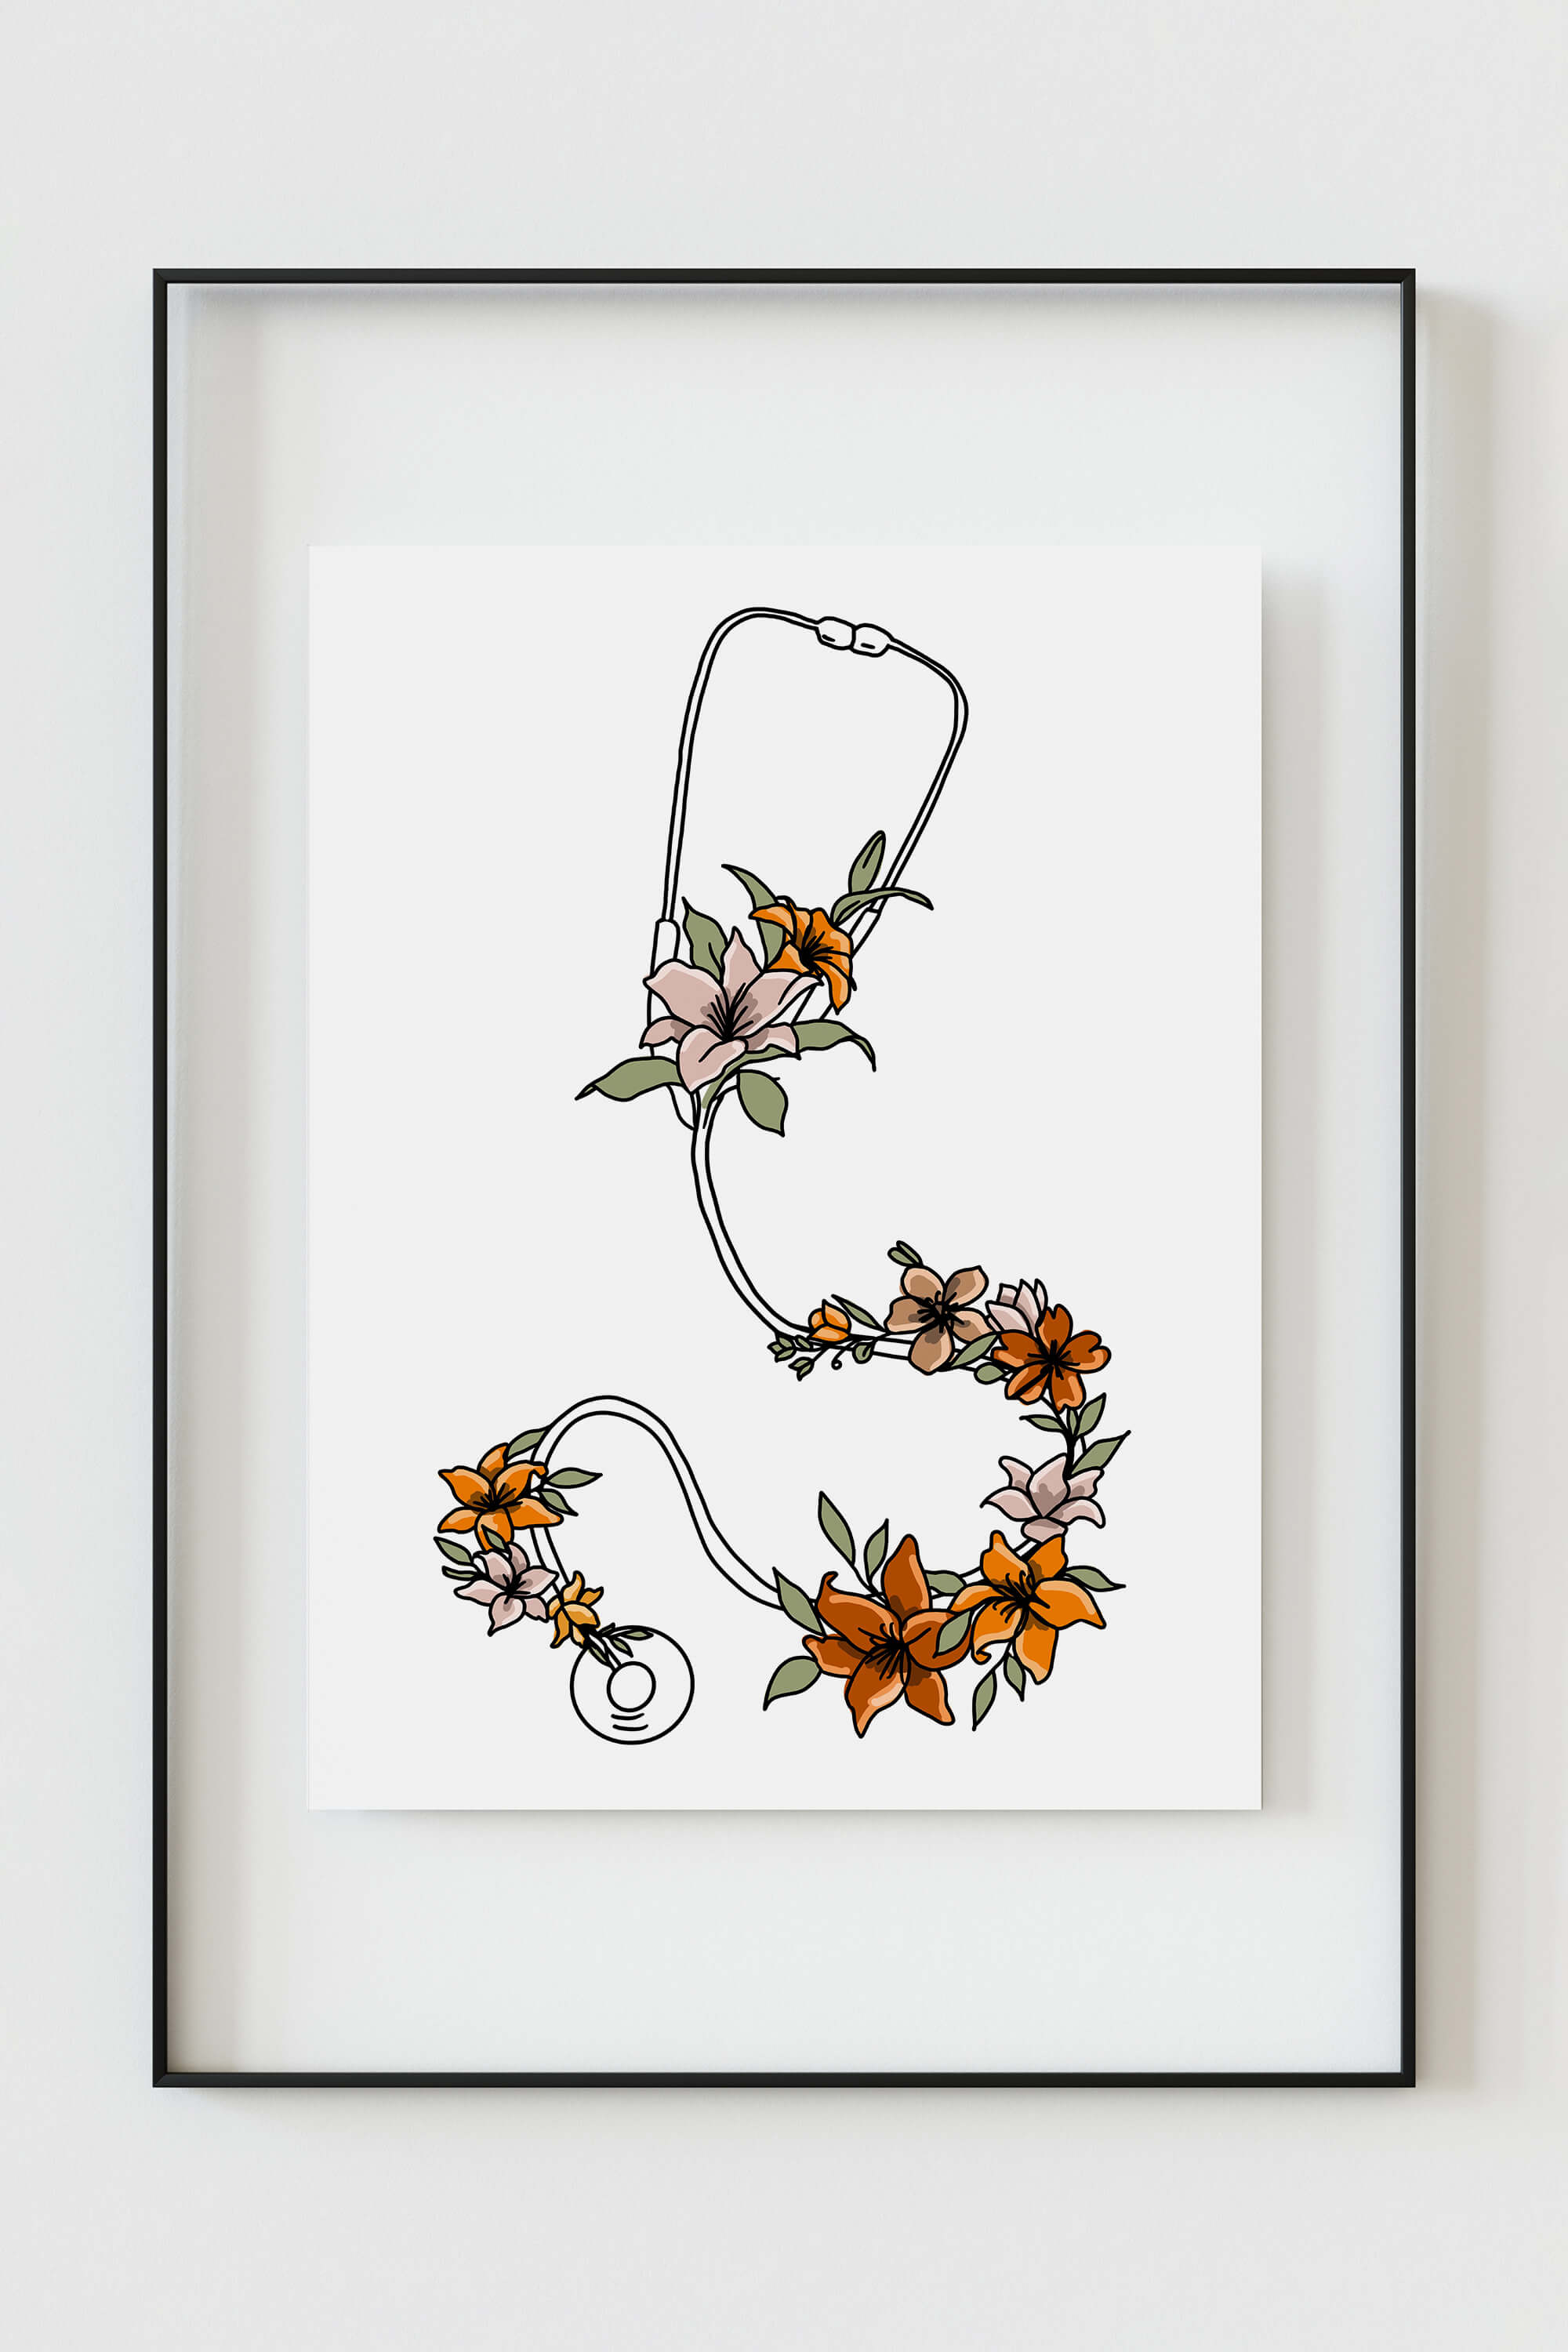 Vibrant medical wall decor featuring a stethoscope intertwined with flowers, ideal for healthcare settings.